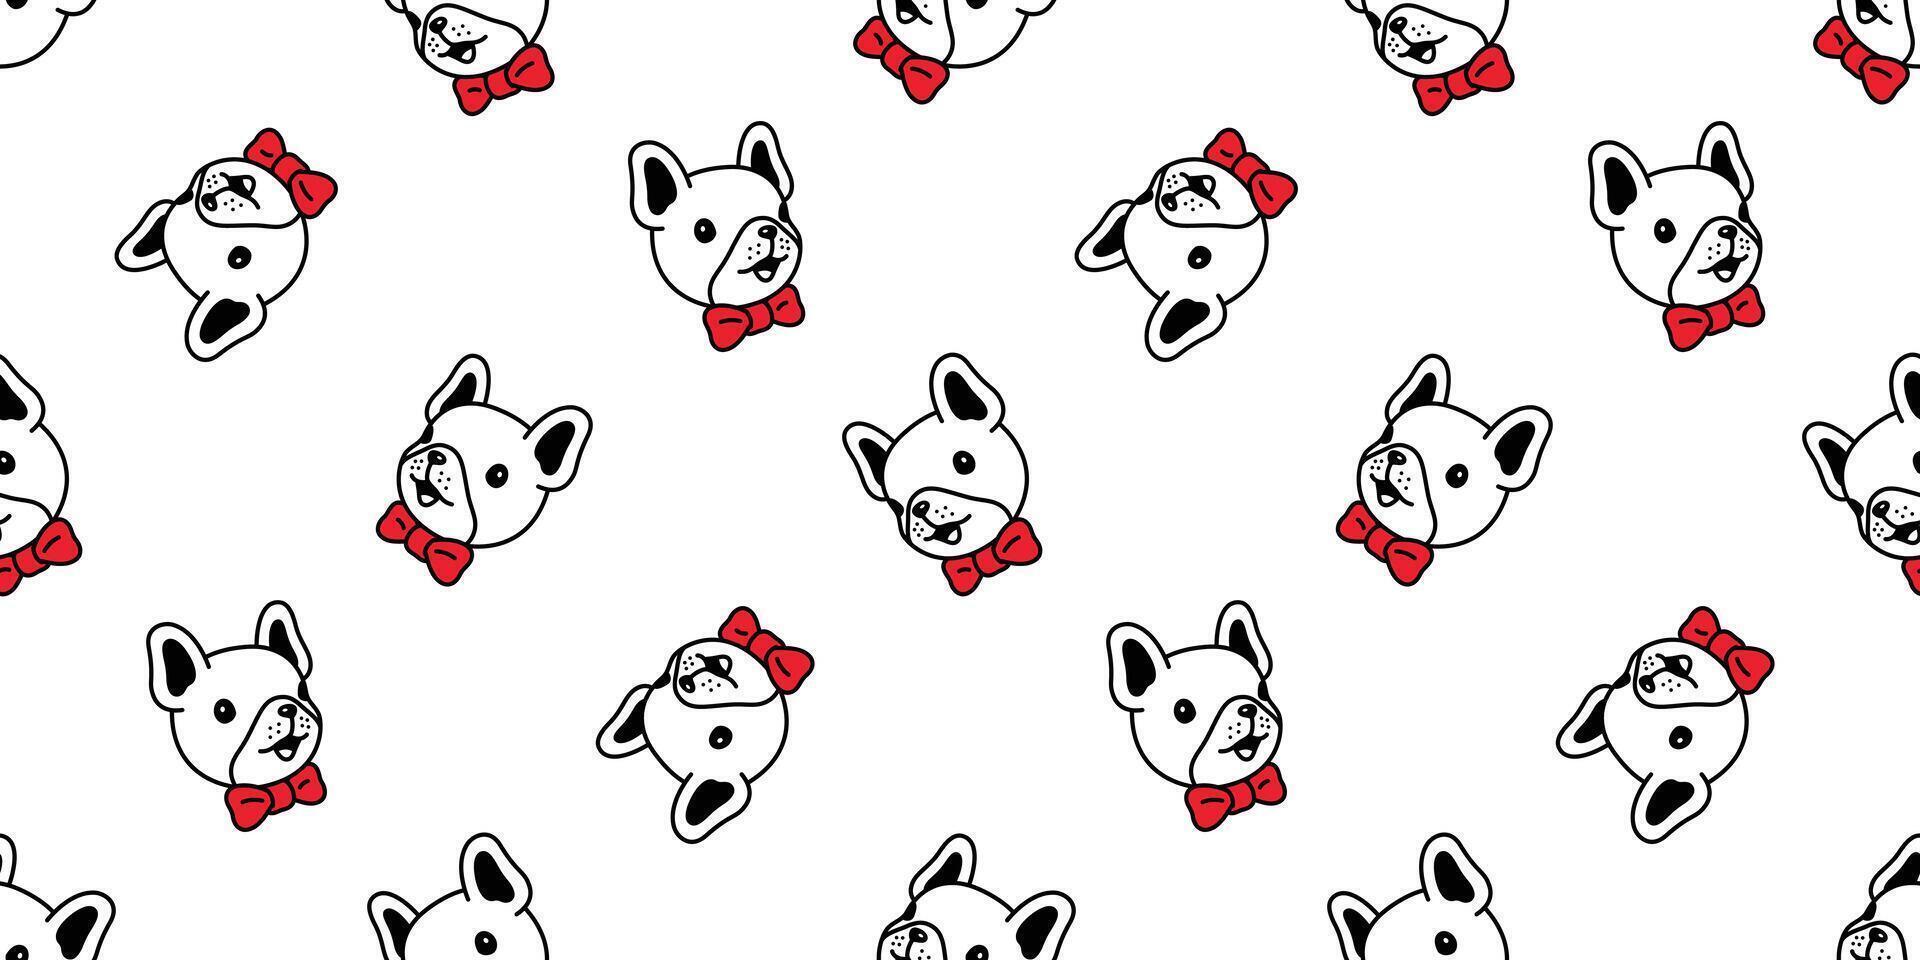 dog seamless pattern french bulldog vector face head bow tie pet puppy animal scarf isolated repeat wallpaper tile background cartoon illustration doodle design